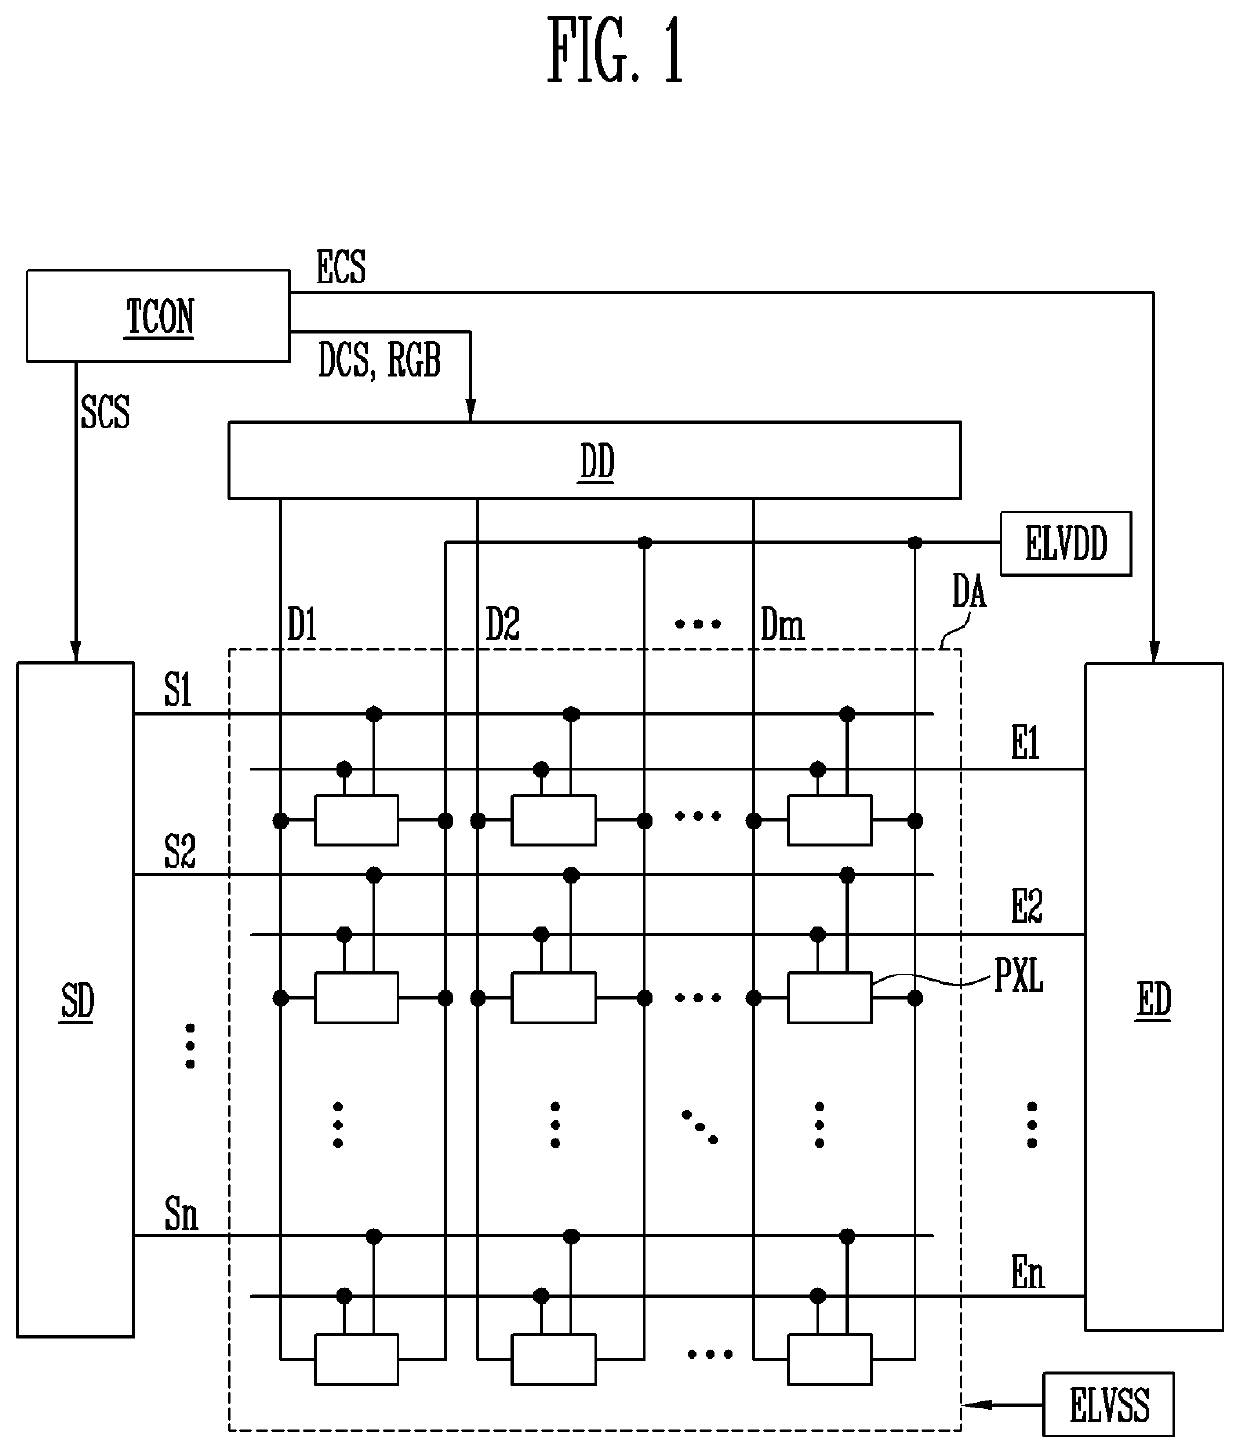 Pixel and display device having the same